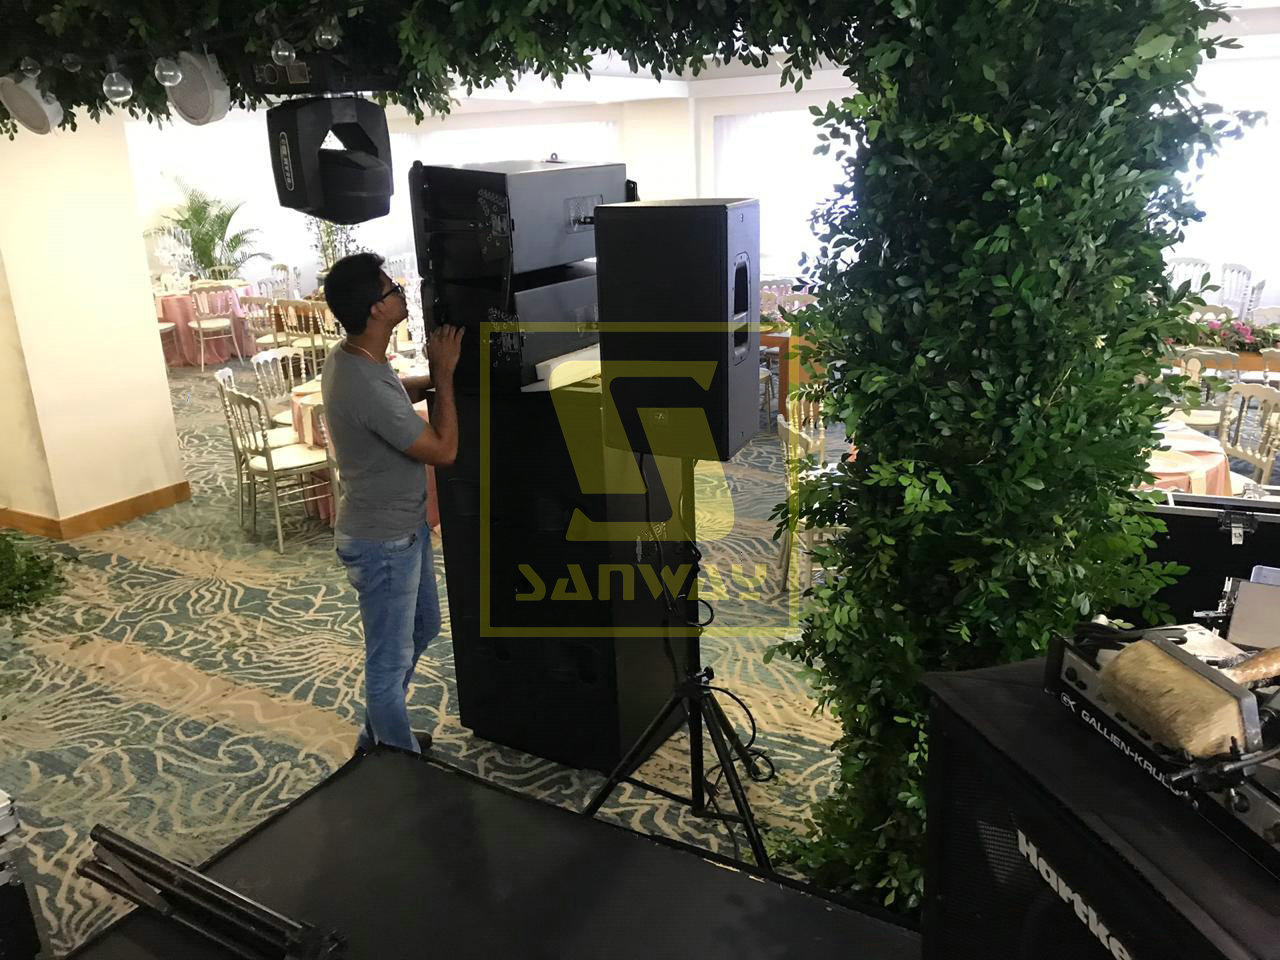 Sanway GEO S1210 Line Array and RS18 Subwoofer Supplied the 500 People Event